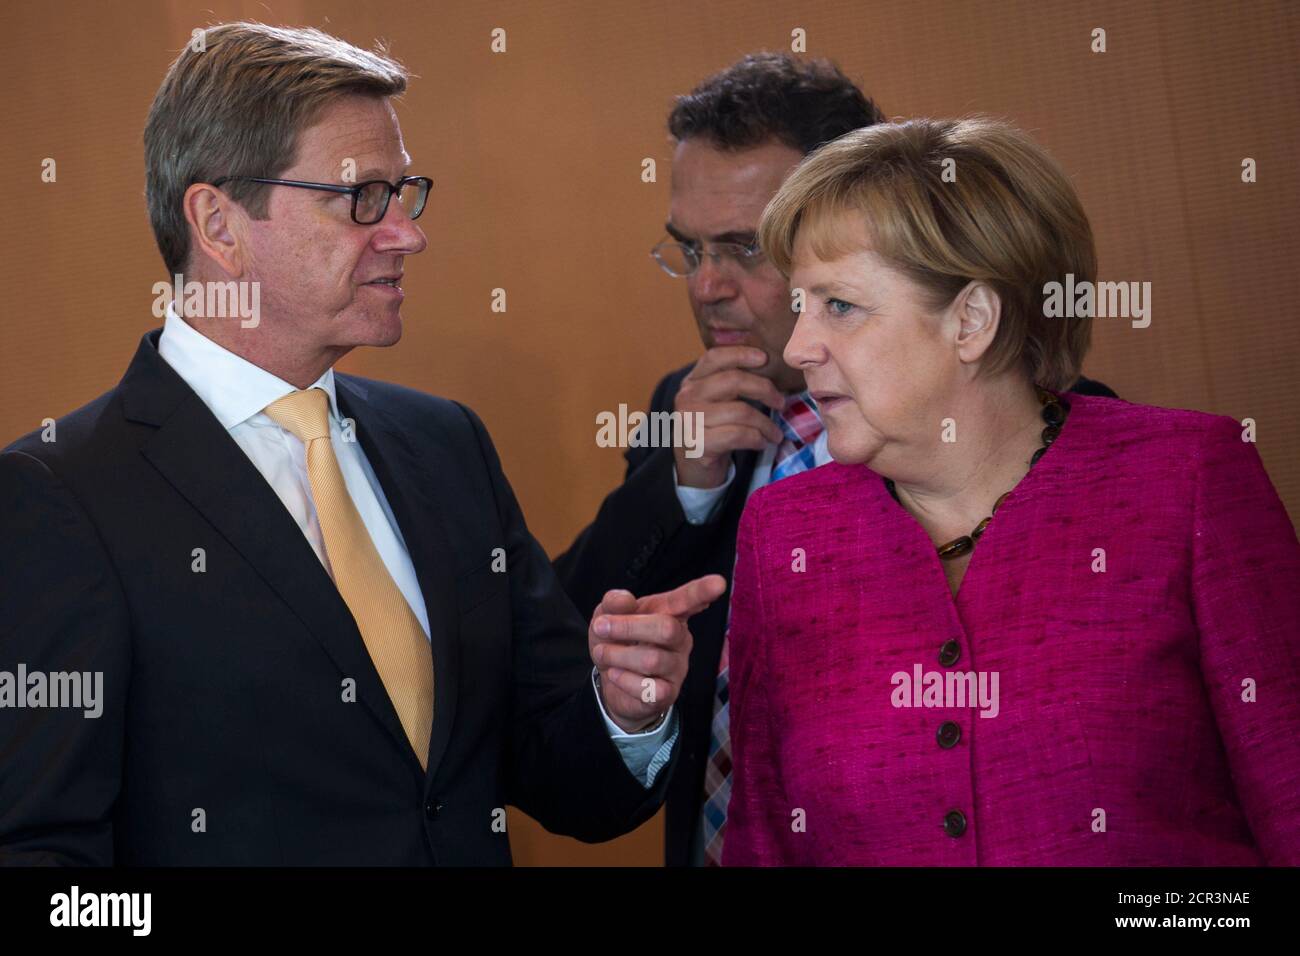 Germany's Chancellor Angela Merkel (R), Foreign Minister Guido Westerwelle (L) and Interior Minister Hans-Peter Friedrich talk before a cabinet meeting in Berlin, August 14, 2013.  REUTERS/Thomas Peter (GERMANY  - Tags: POLITICS) Stock Photo